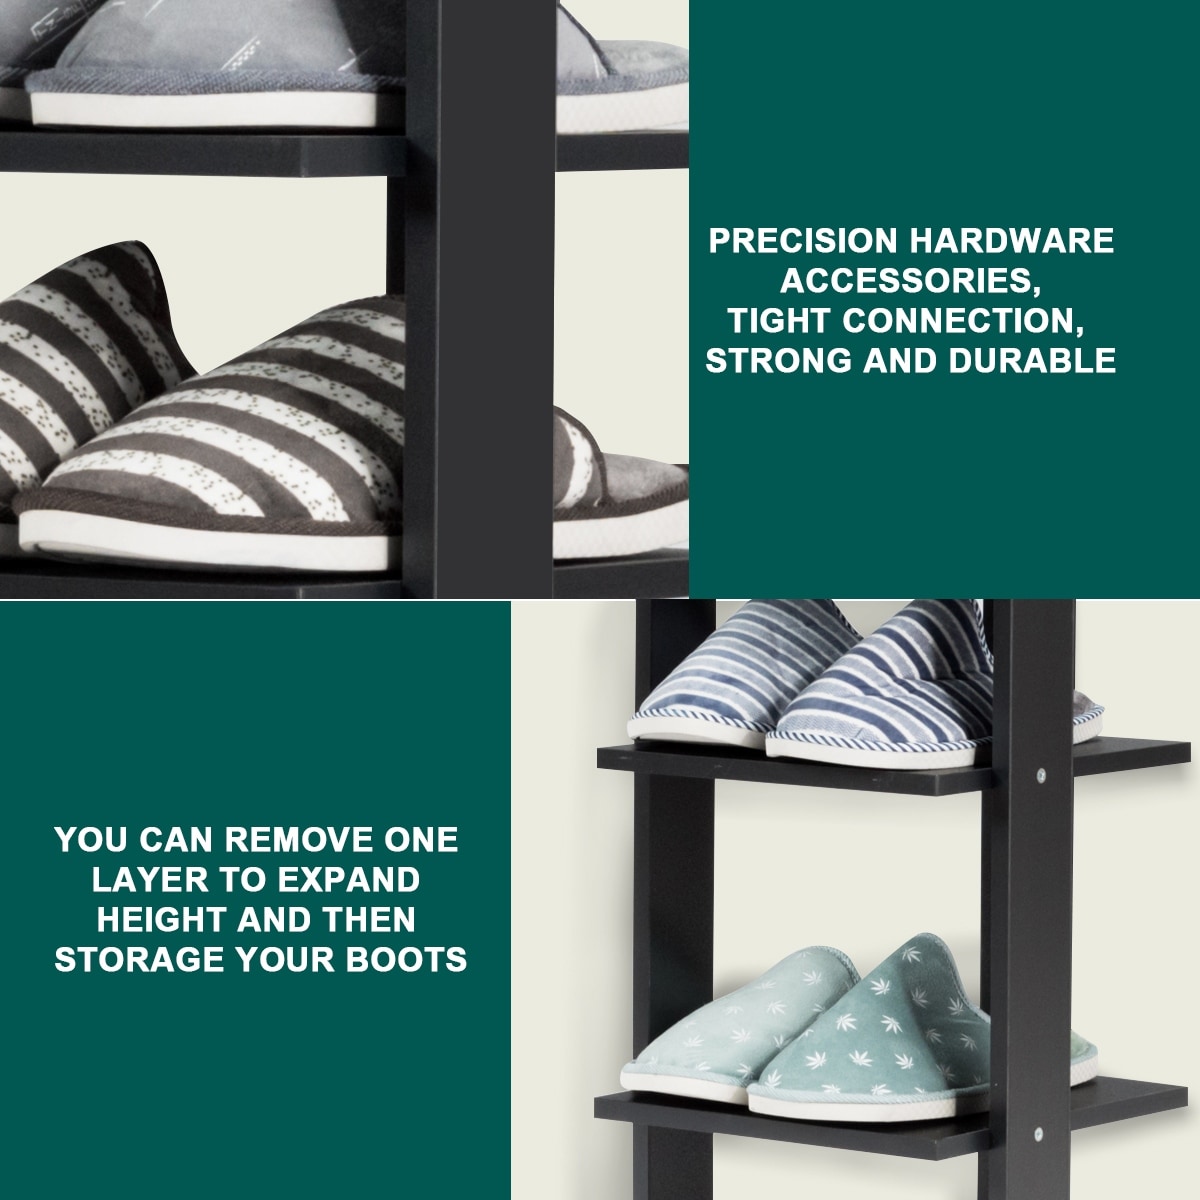 https://ak1.ostkcdn.com/images/products/is/images/direct/9495f27c02a23658305f84dce293ce998745719d/7-Tier-Compact-Shoe-Rack-Free-Standing-Storage-Organizer-Shelves.jpg